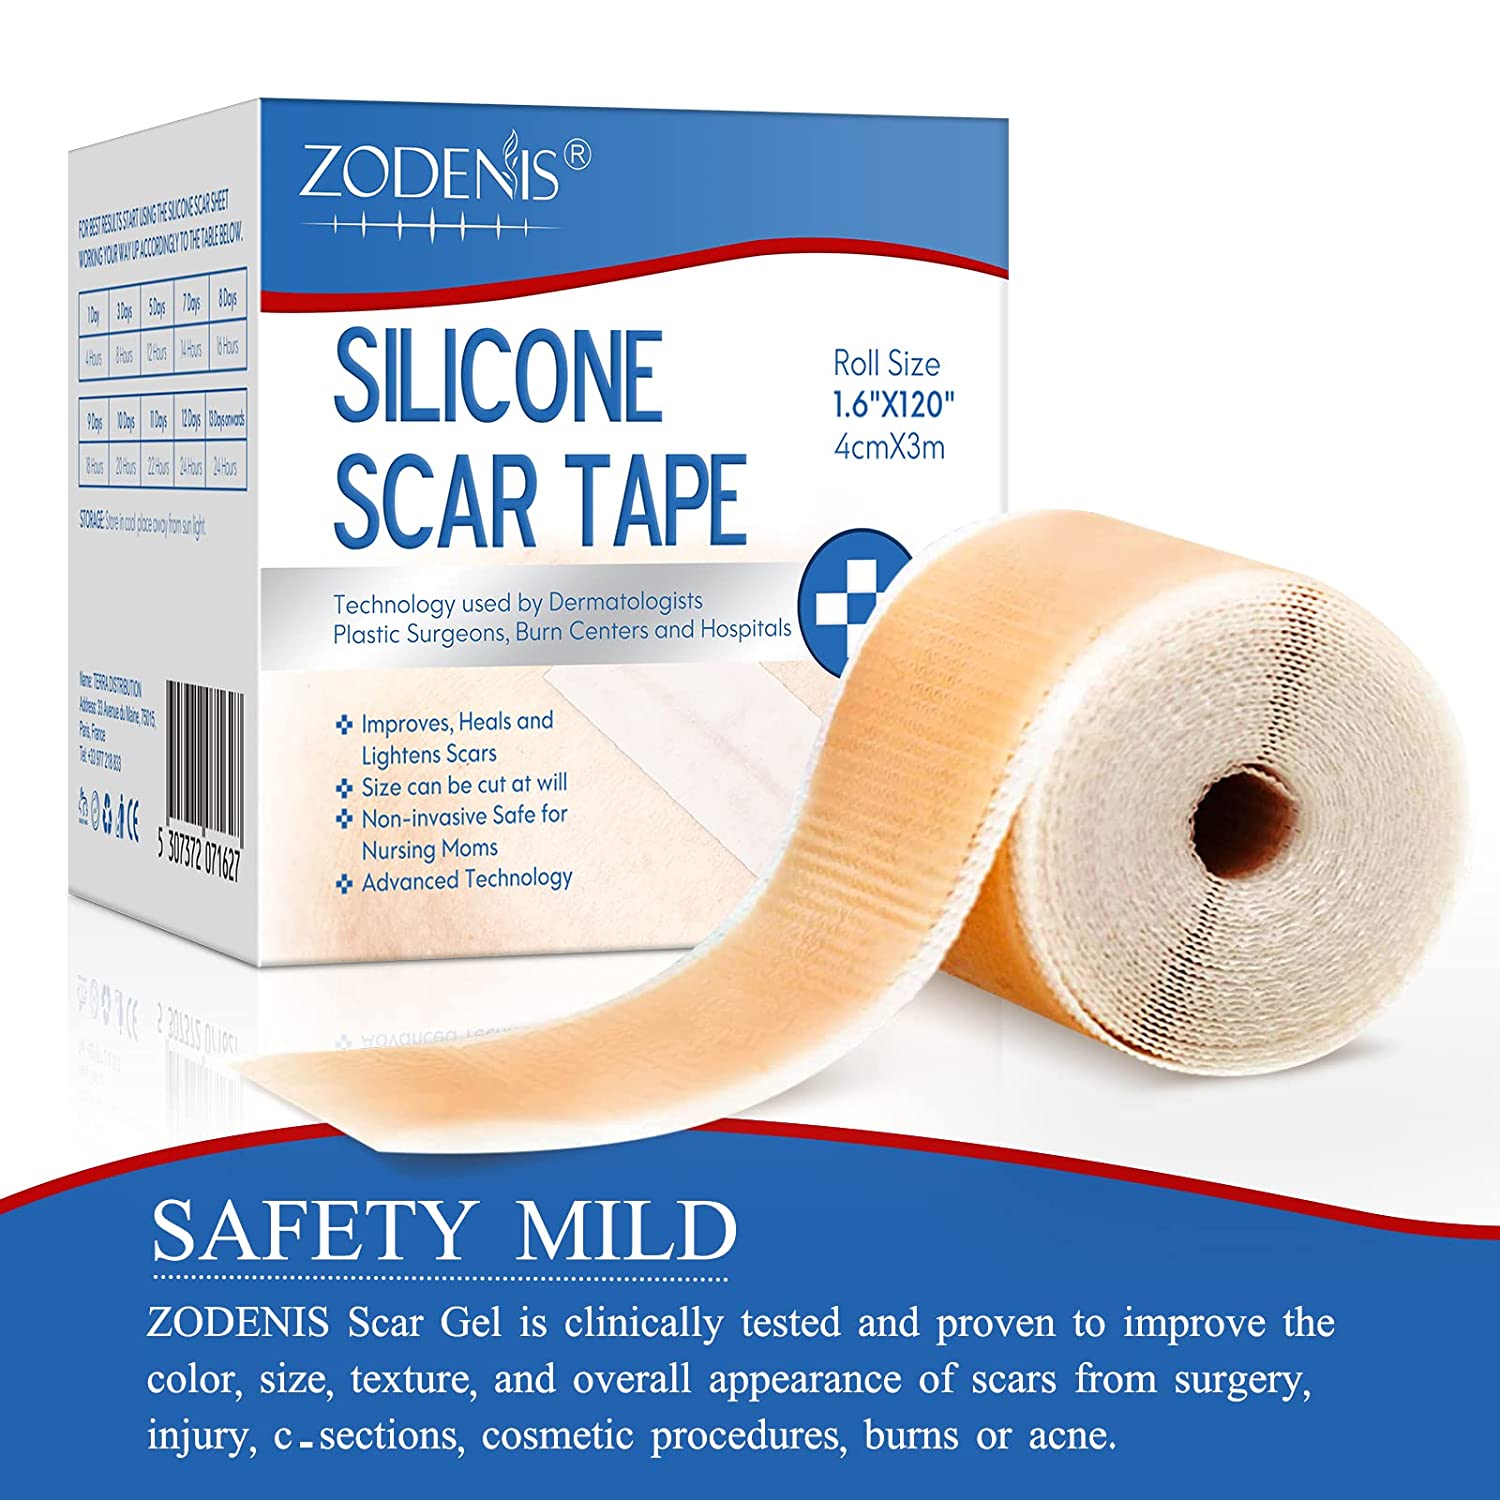 best silicone scar sheets review